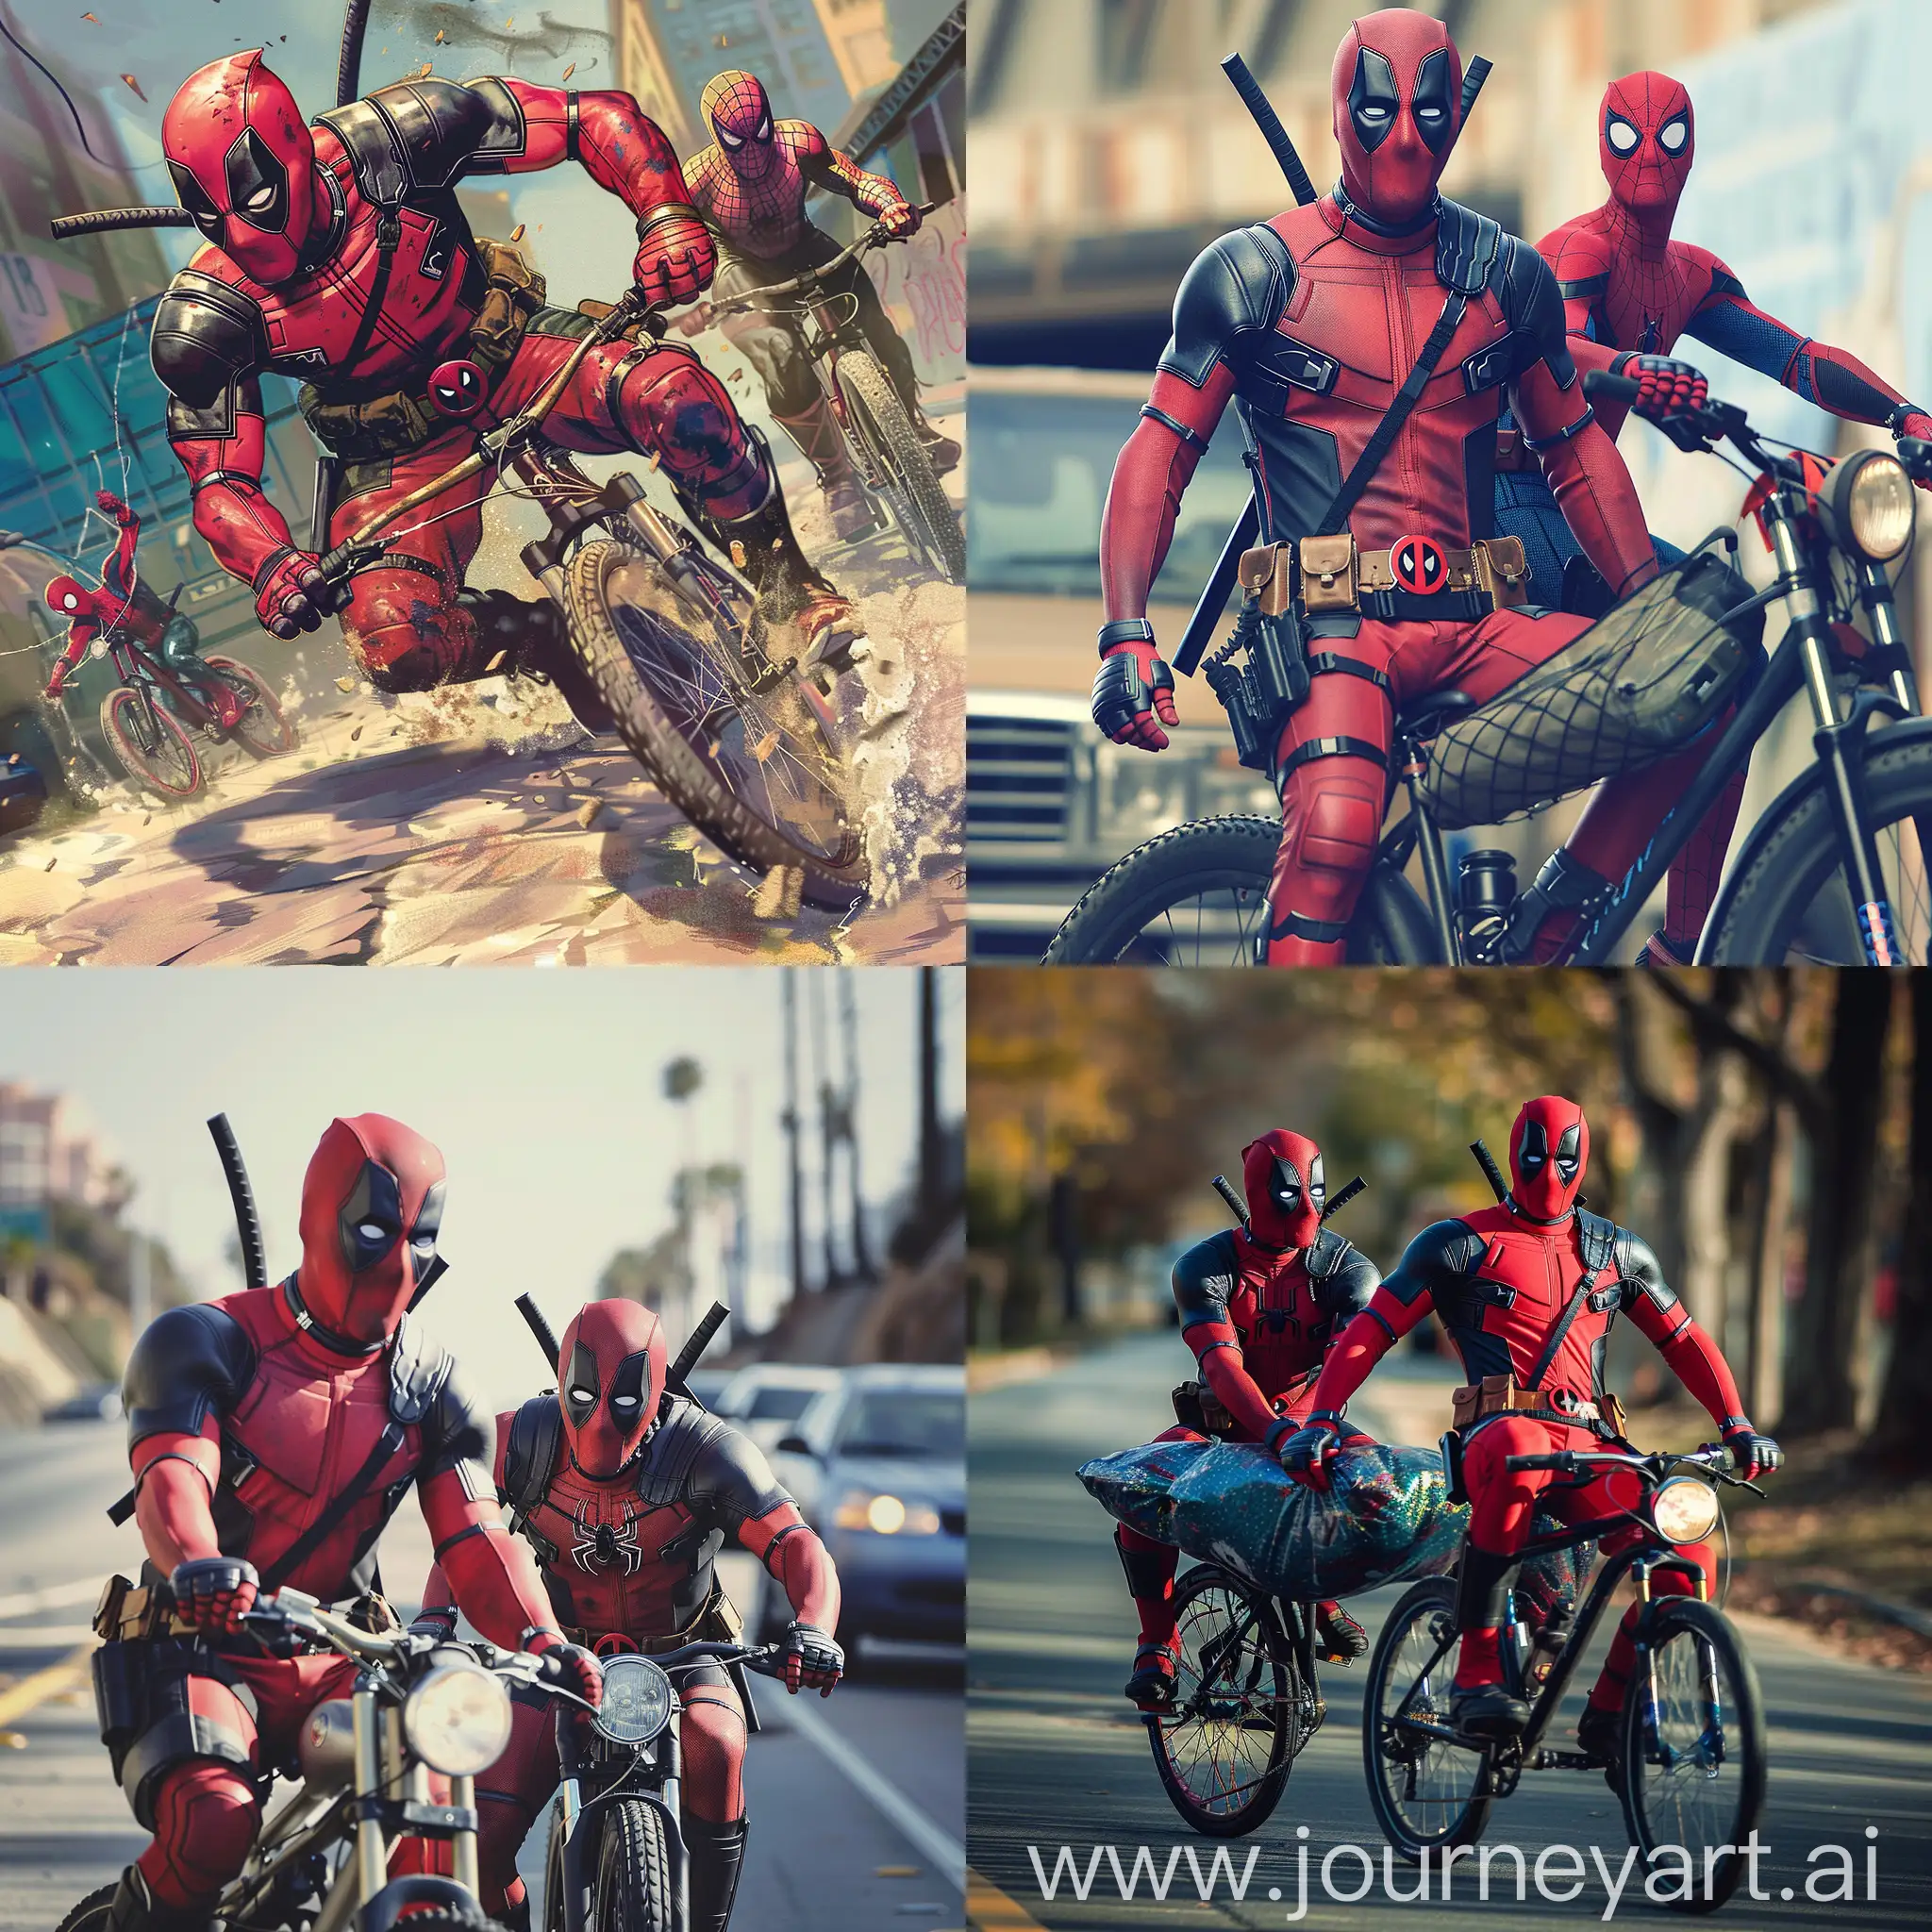 Deadpool-and-Spiderman-Riding-Motorcycle-Together